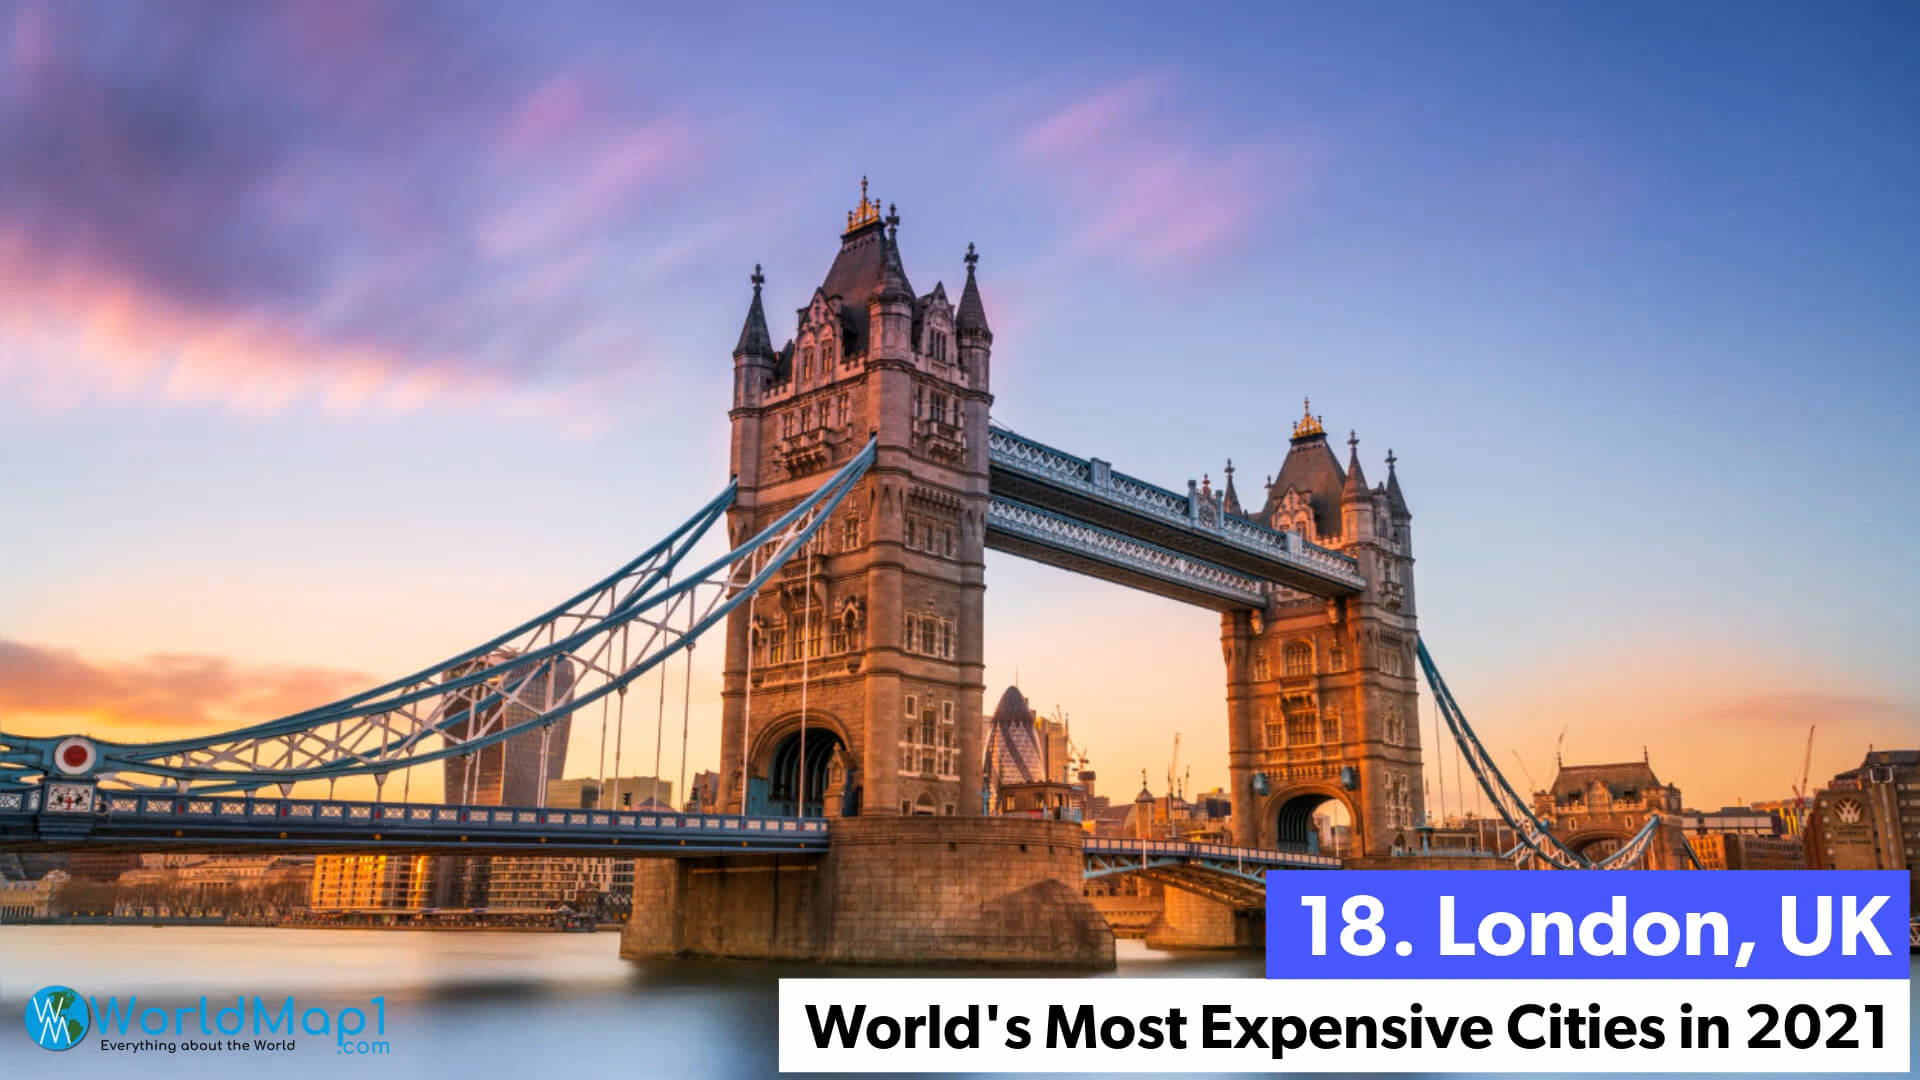 World's Most Expensive Cities - London, UK